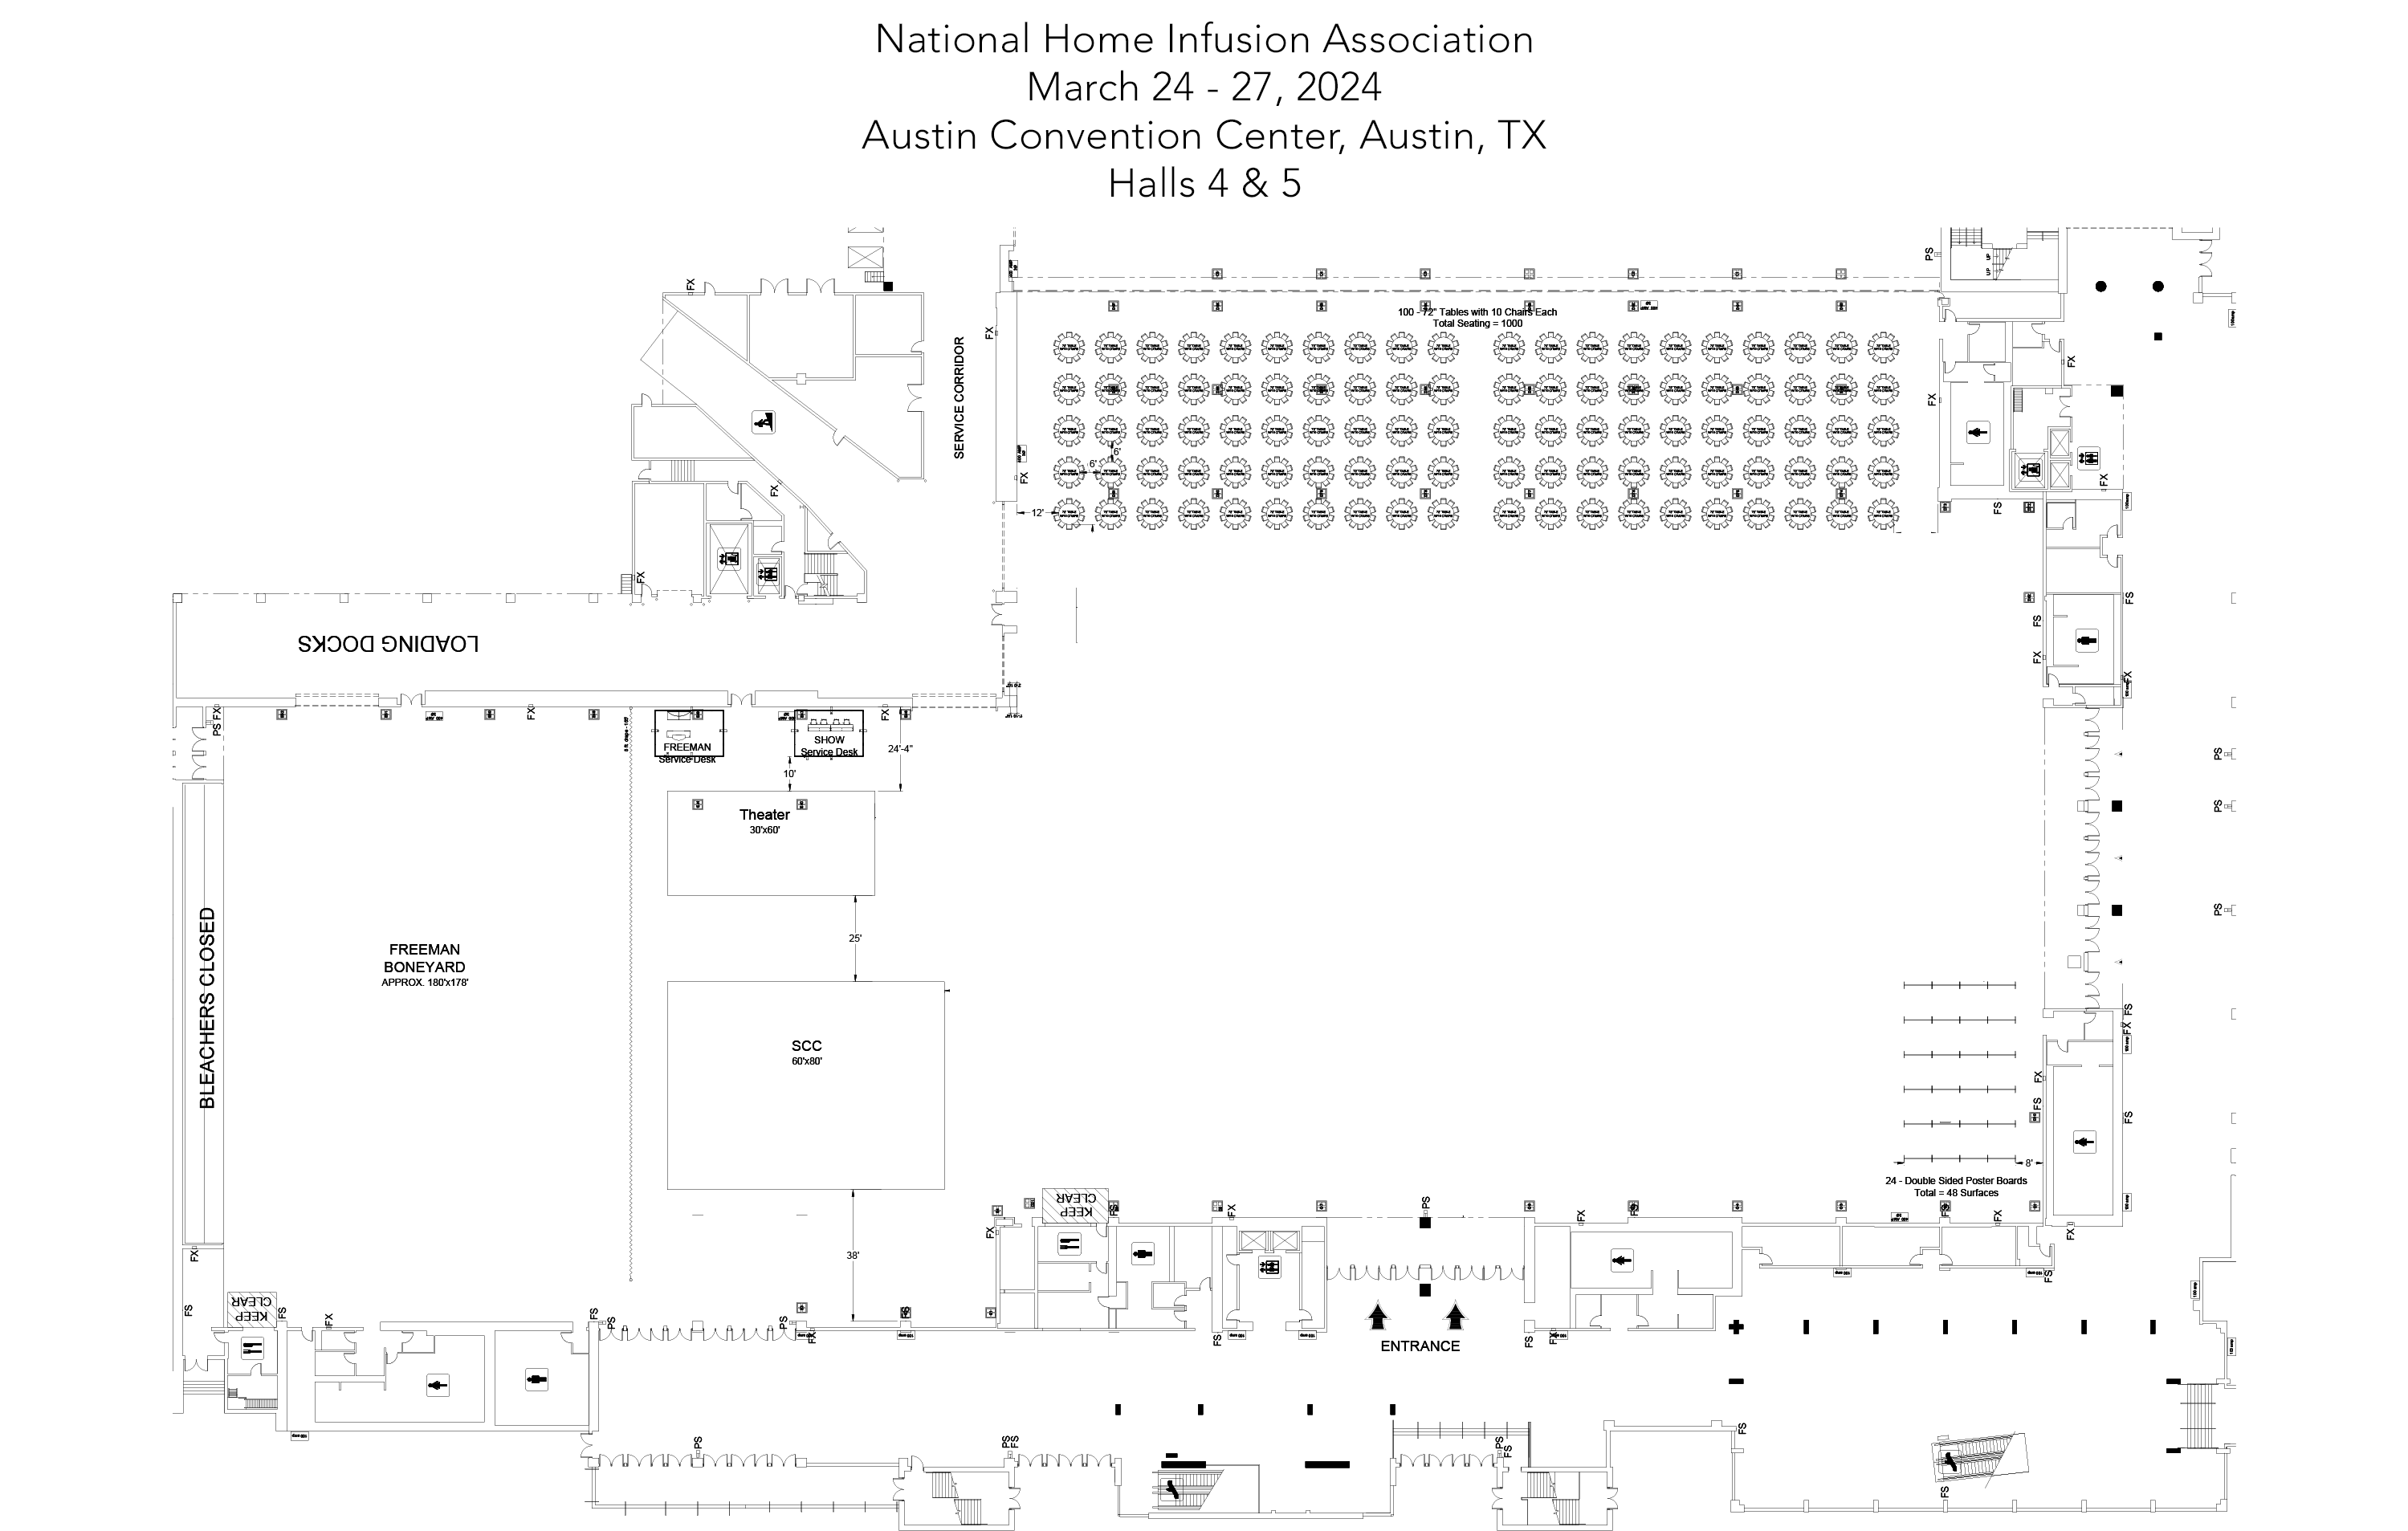 NHIA 2024 Annual Conference Exhibitor Floor Plan